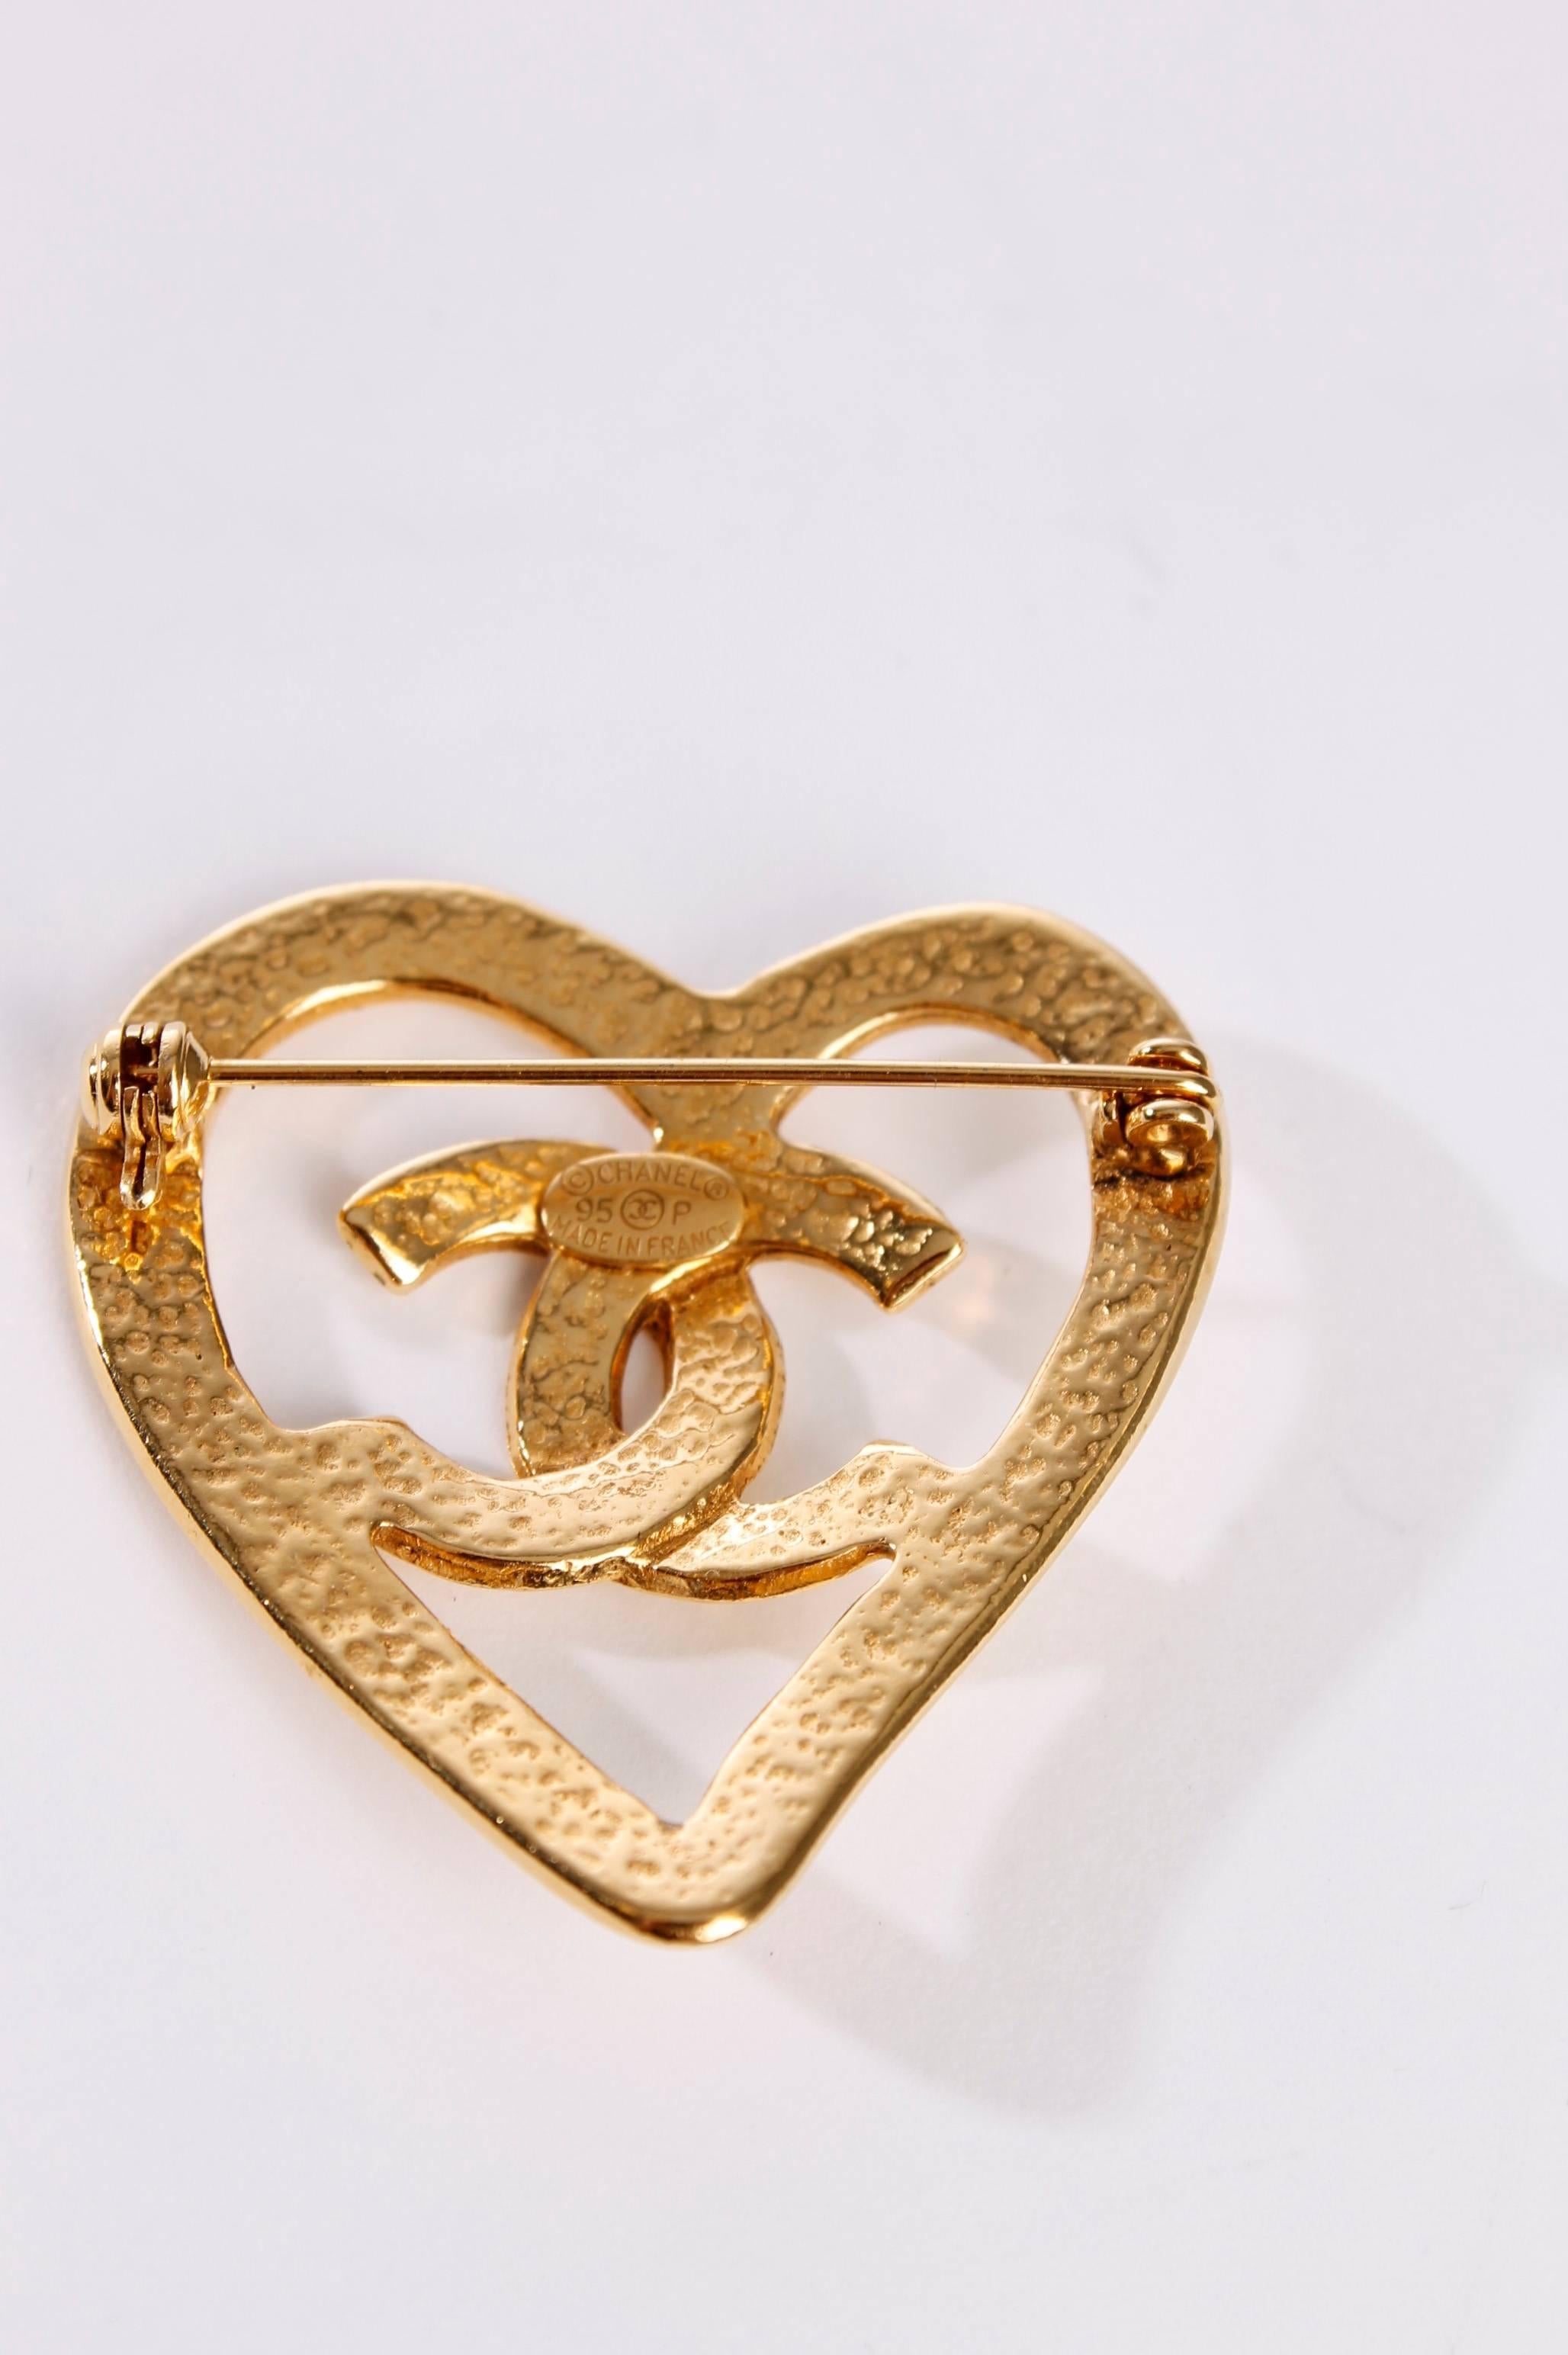 Heart shaped gold plated Chanel brooch, what a sweetie!

This filigrain brooch measures 4 centimeters in heigth and is 4 centimeters wide, a large CC-logo in the middle. On the back you find the needle with a little lock, so you cannot lose it. A